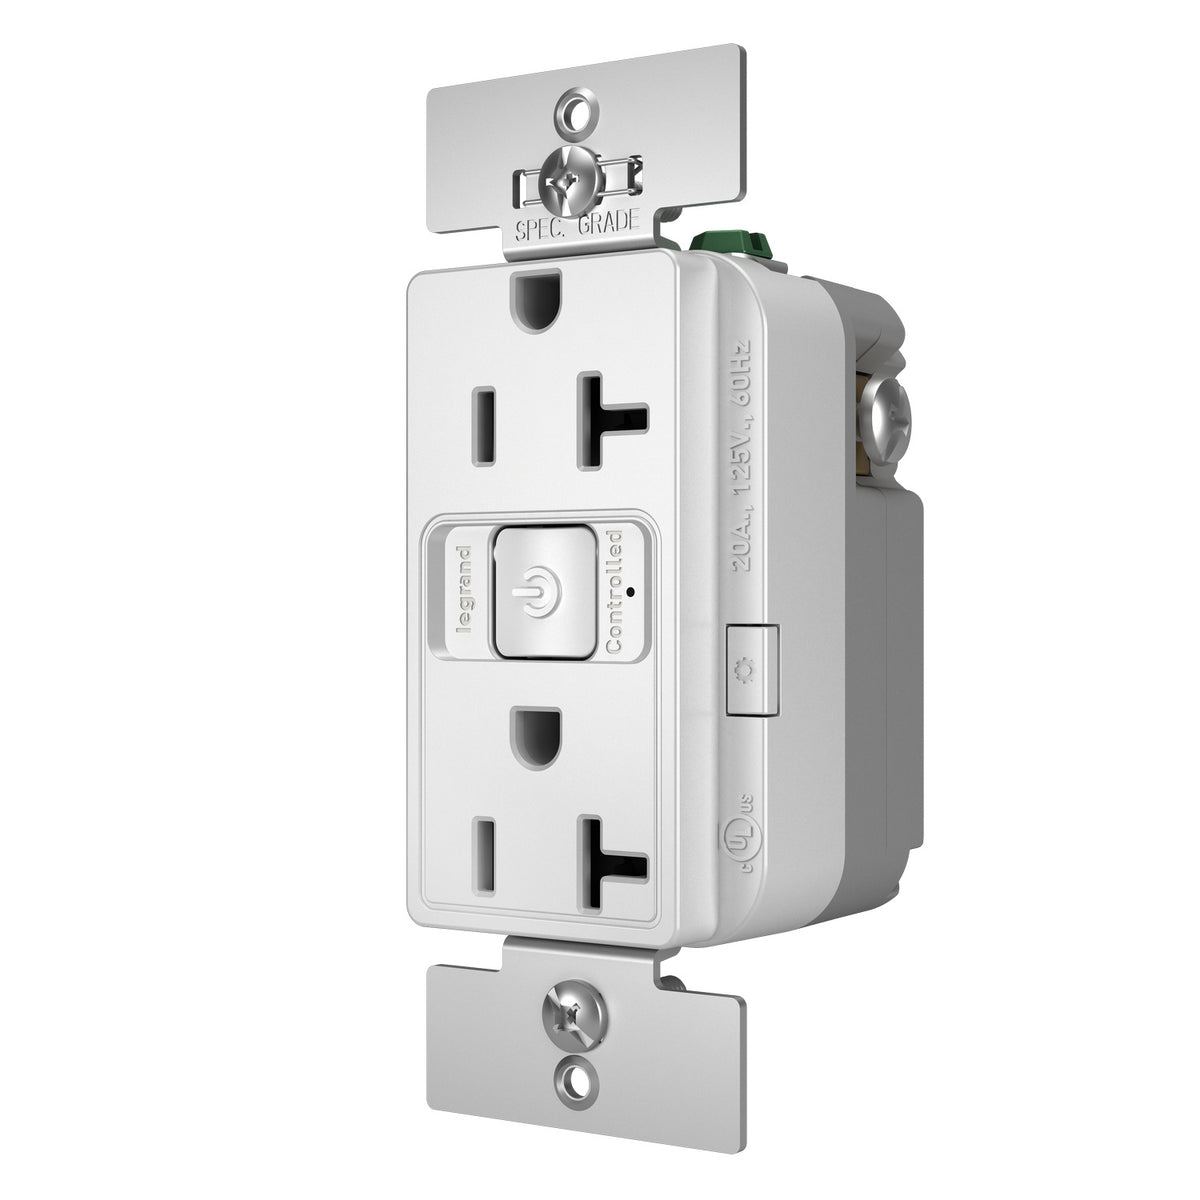 Legrand Canada - WNRR20WH - 20A Outlet - White